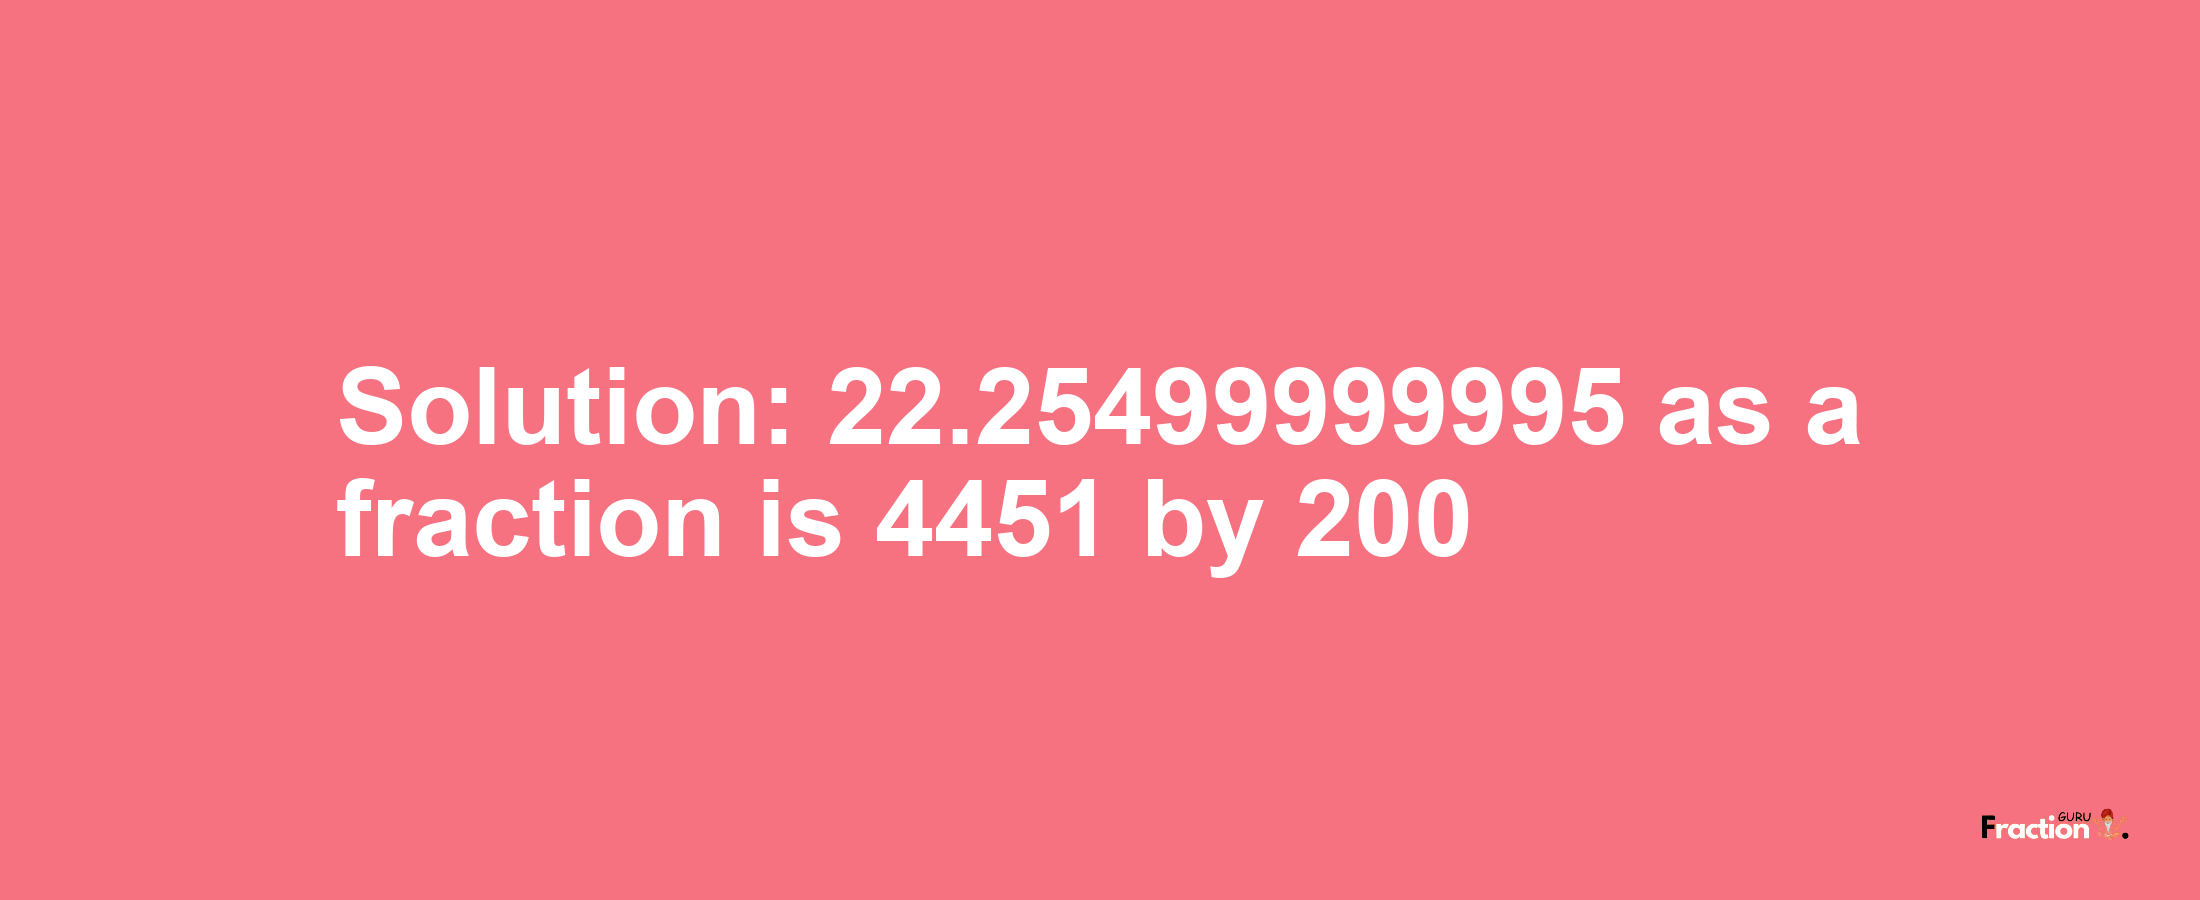 Solution:22.25499999995 as a fraction is 4451/200